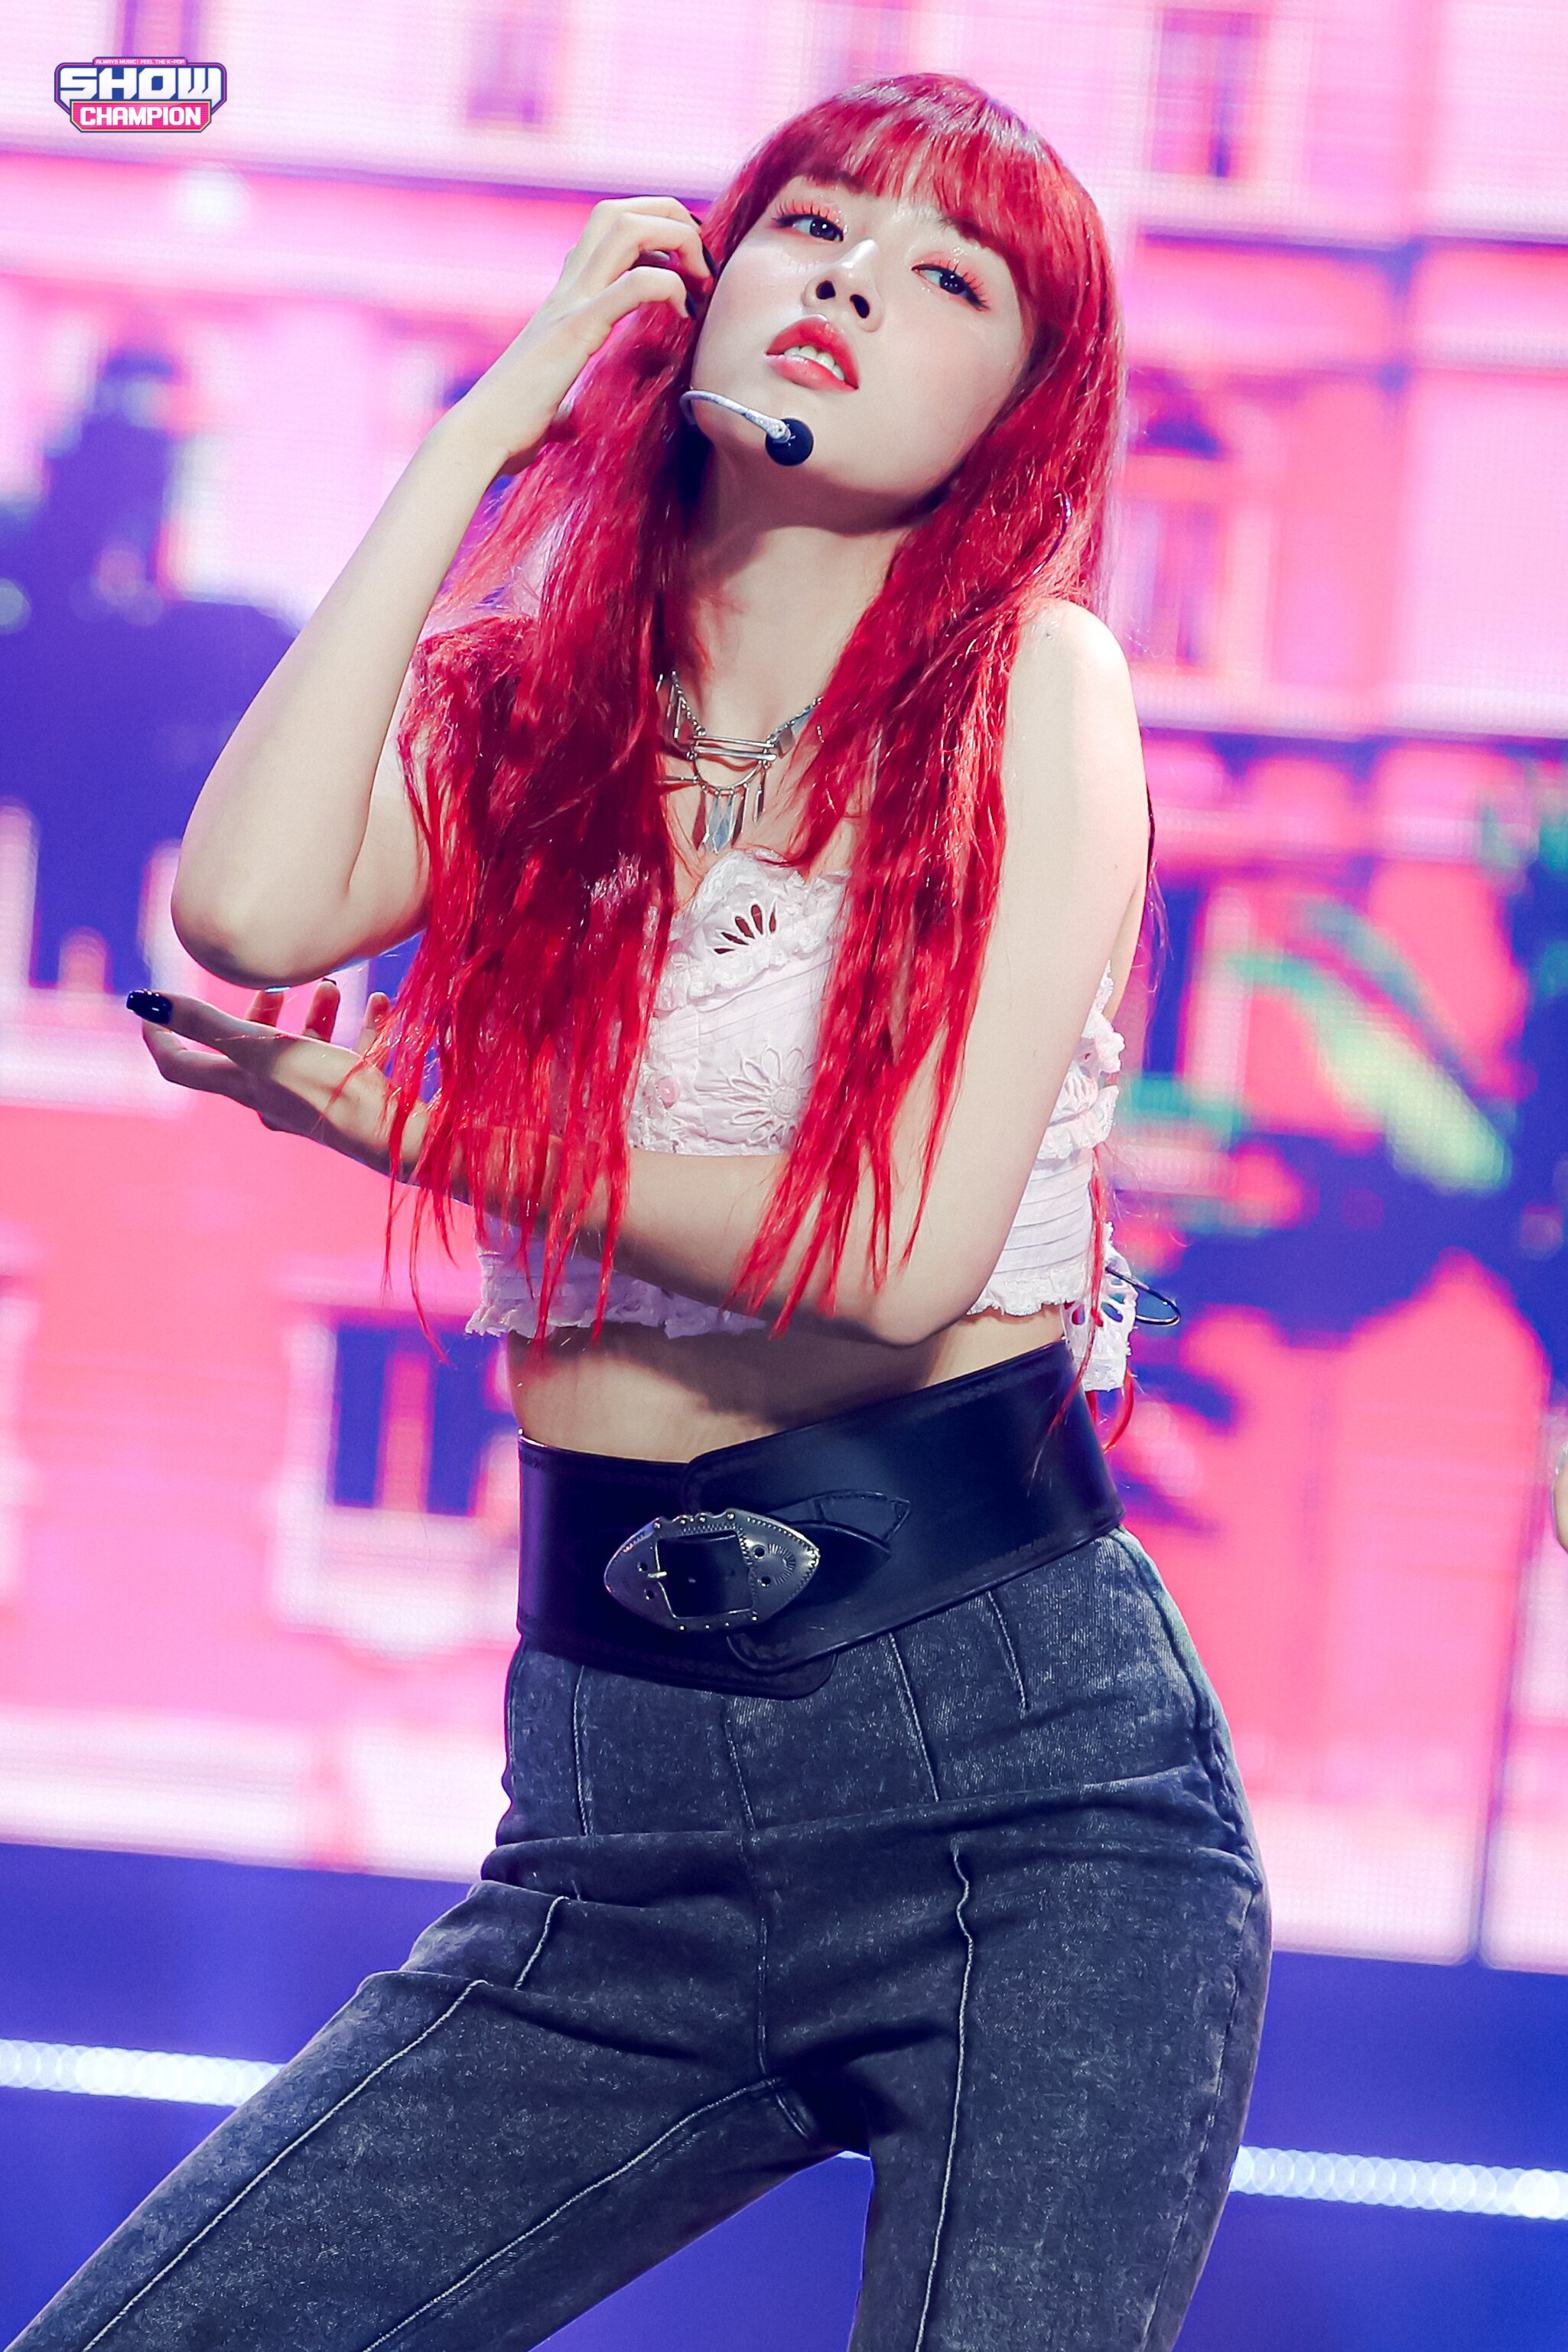 220803 STAYC Yoon 'BEAUTIFUL MONSTER' at Show Champion | kpopping